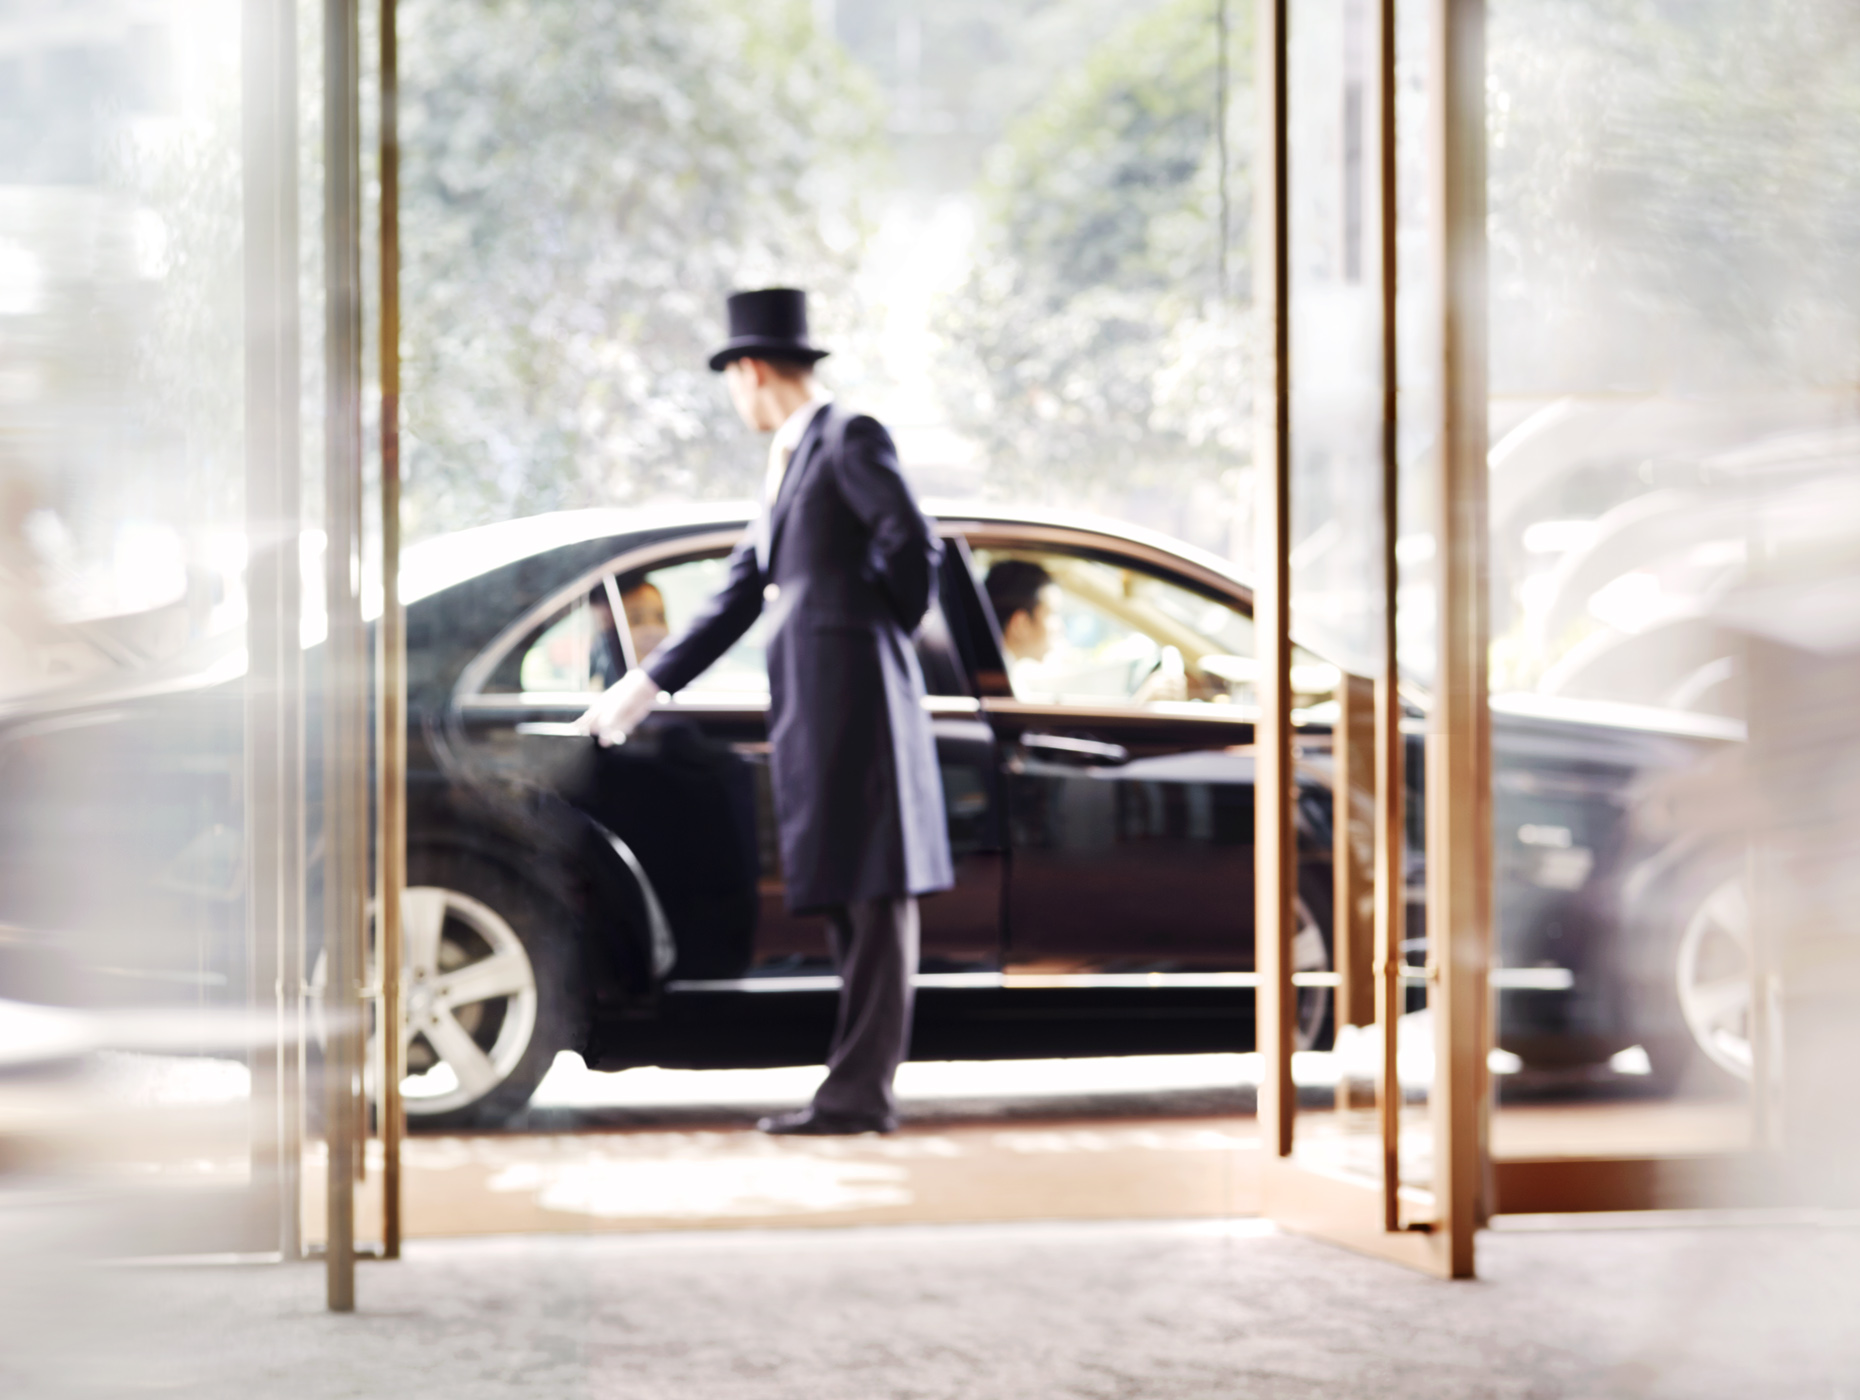 The arrival experience at The Ritz-Carlton, Chengdu | China | 